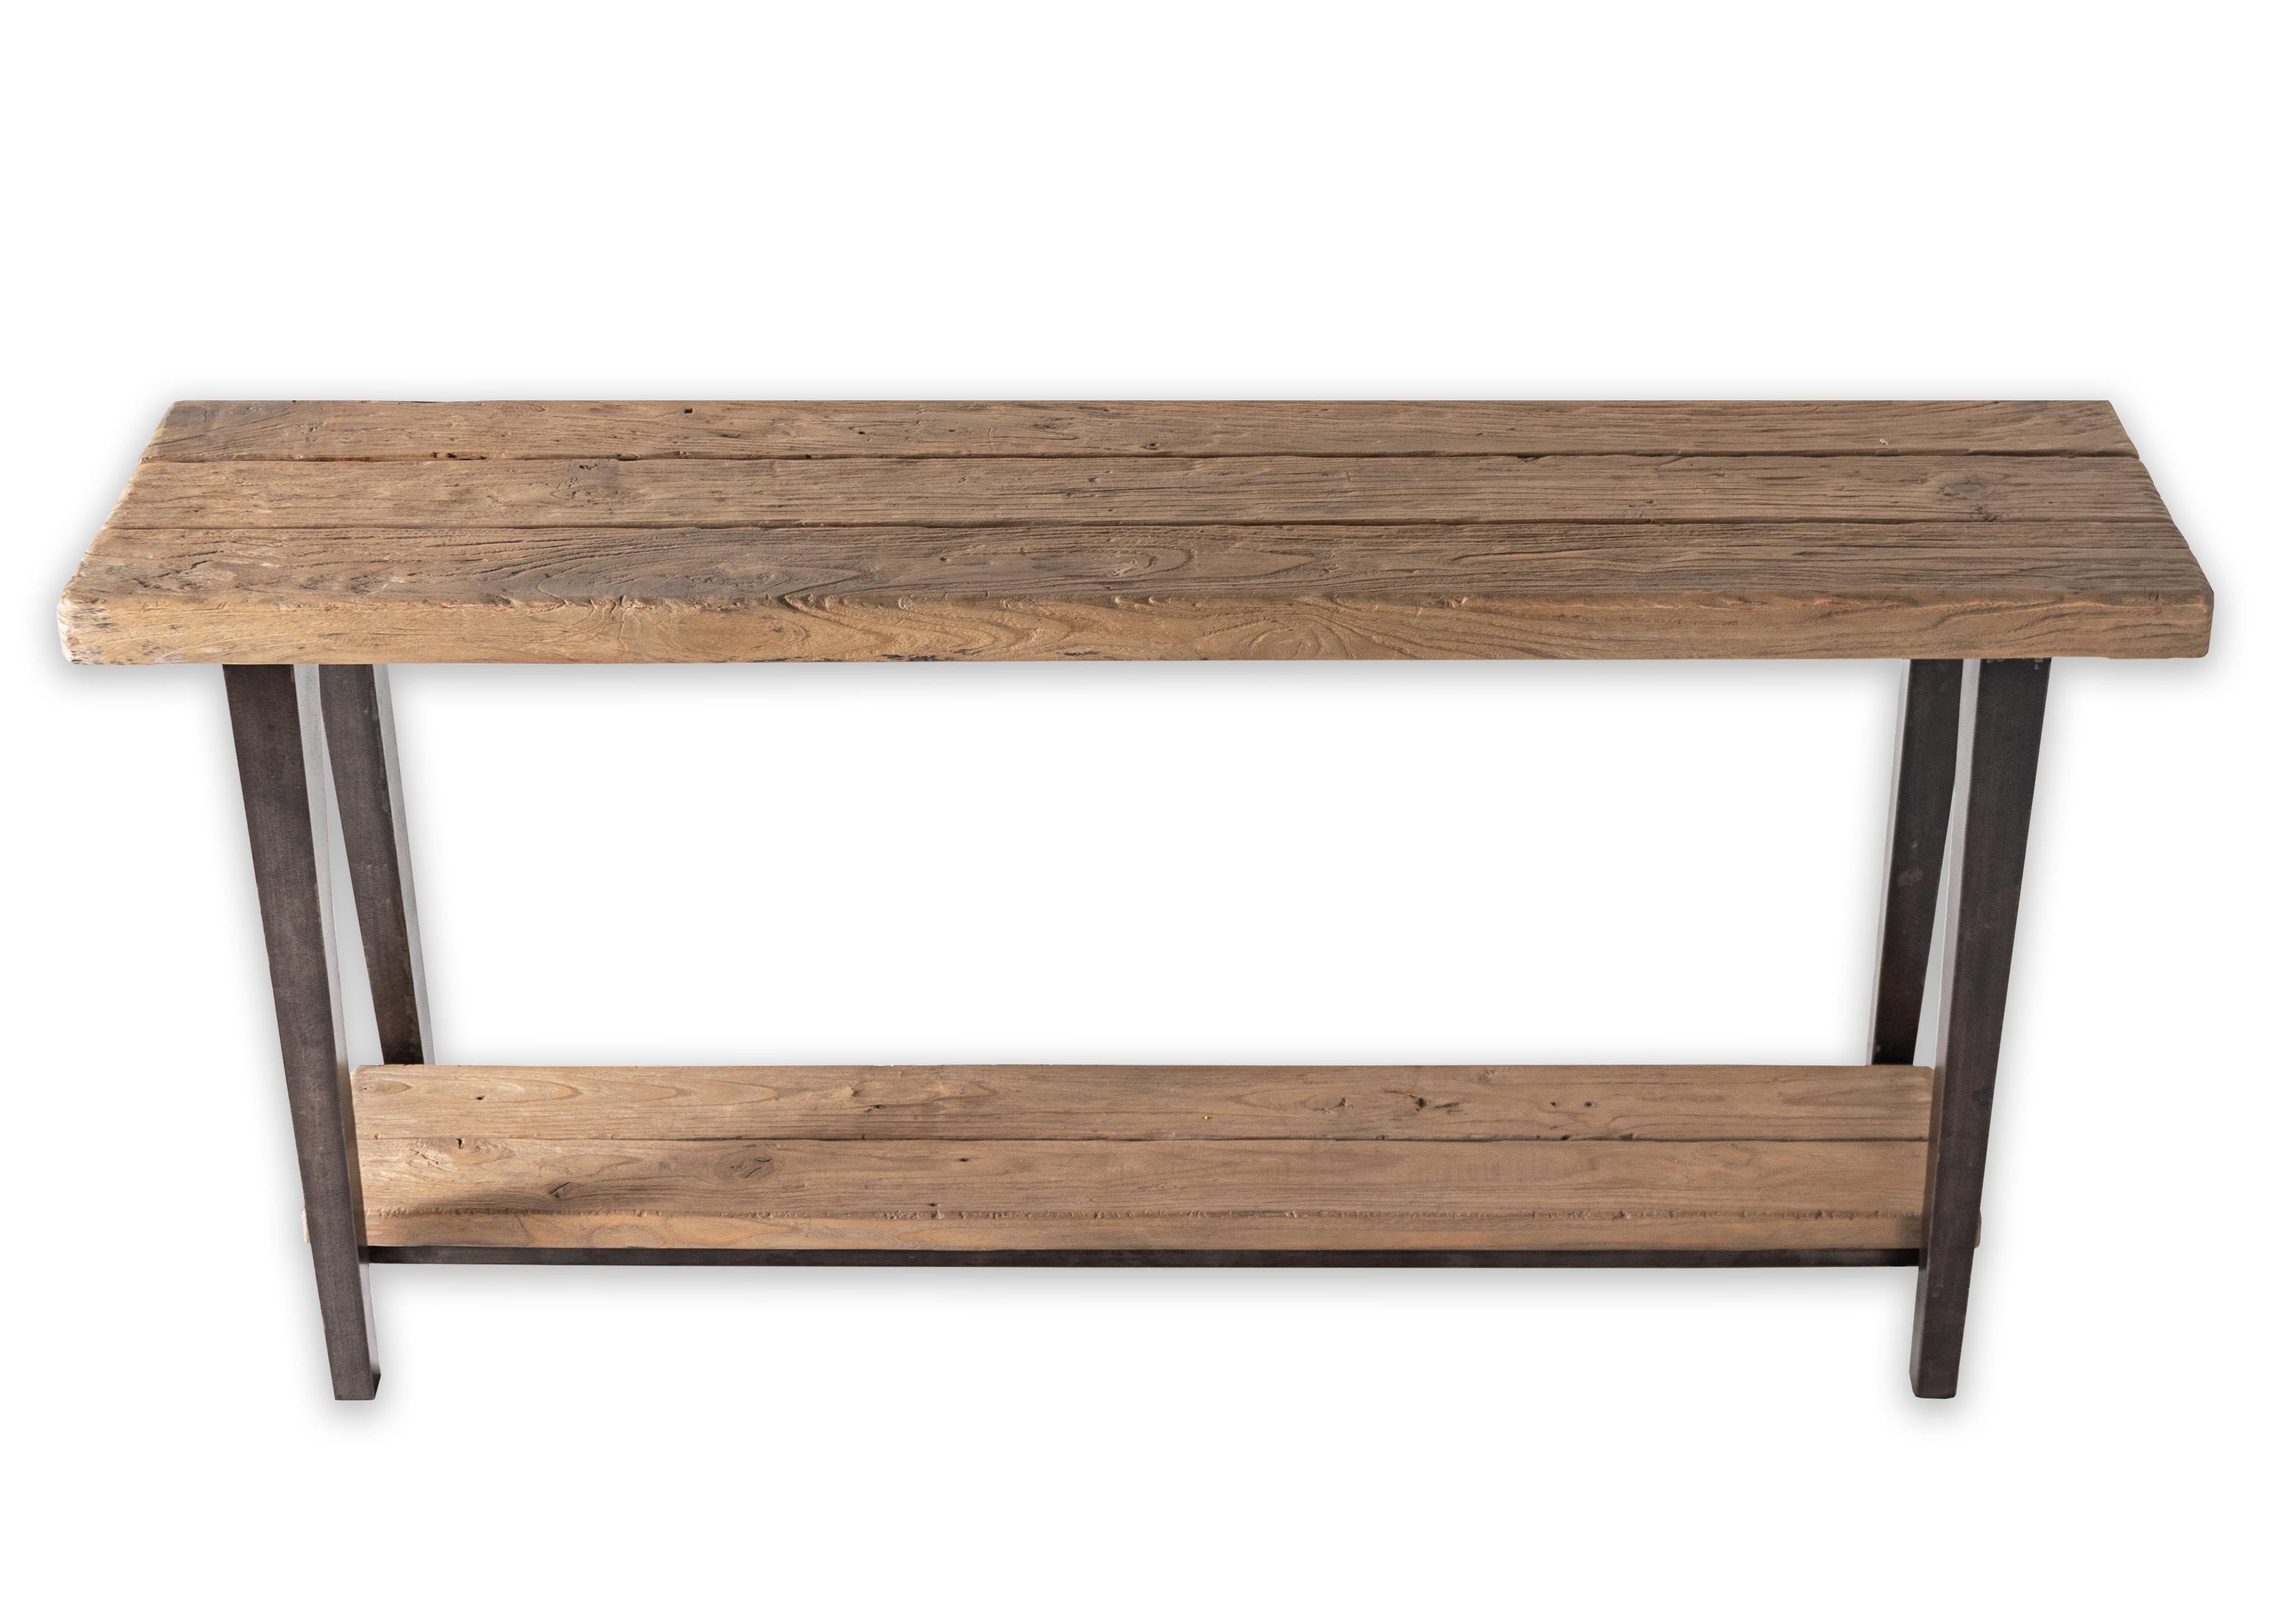 Modern server table in reclaimed distressed elm wood on metal steel base. In my organic, contemporary, vintage and mid-century modern aesthetic.

This piece is a part of Brendan Bass’s one-of-a-kind collection, Le Monde. French for “The World”, the